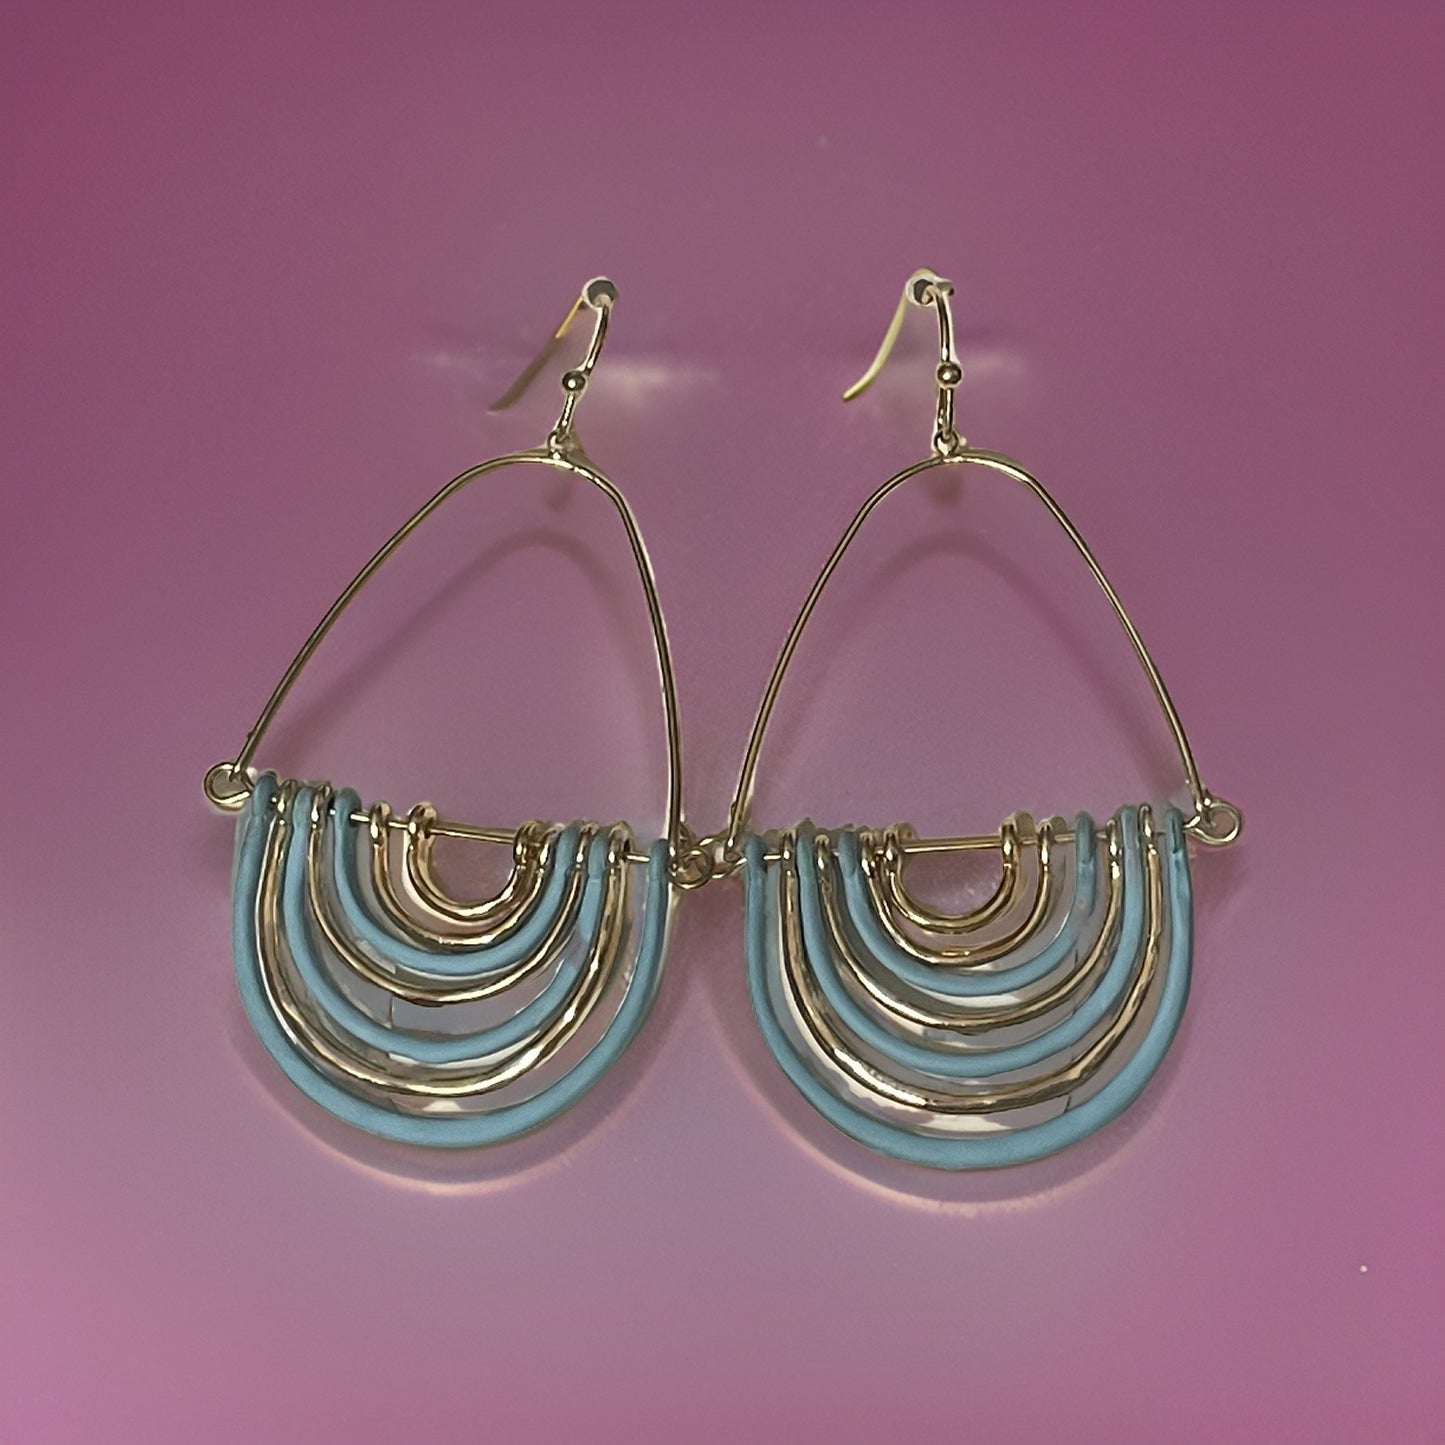 Layered Loop Earrings - Available in 3 colors